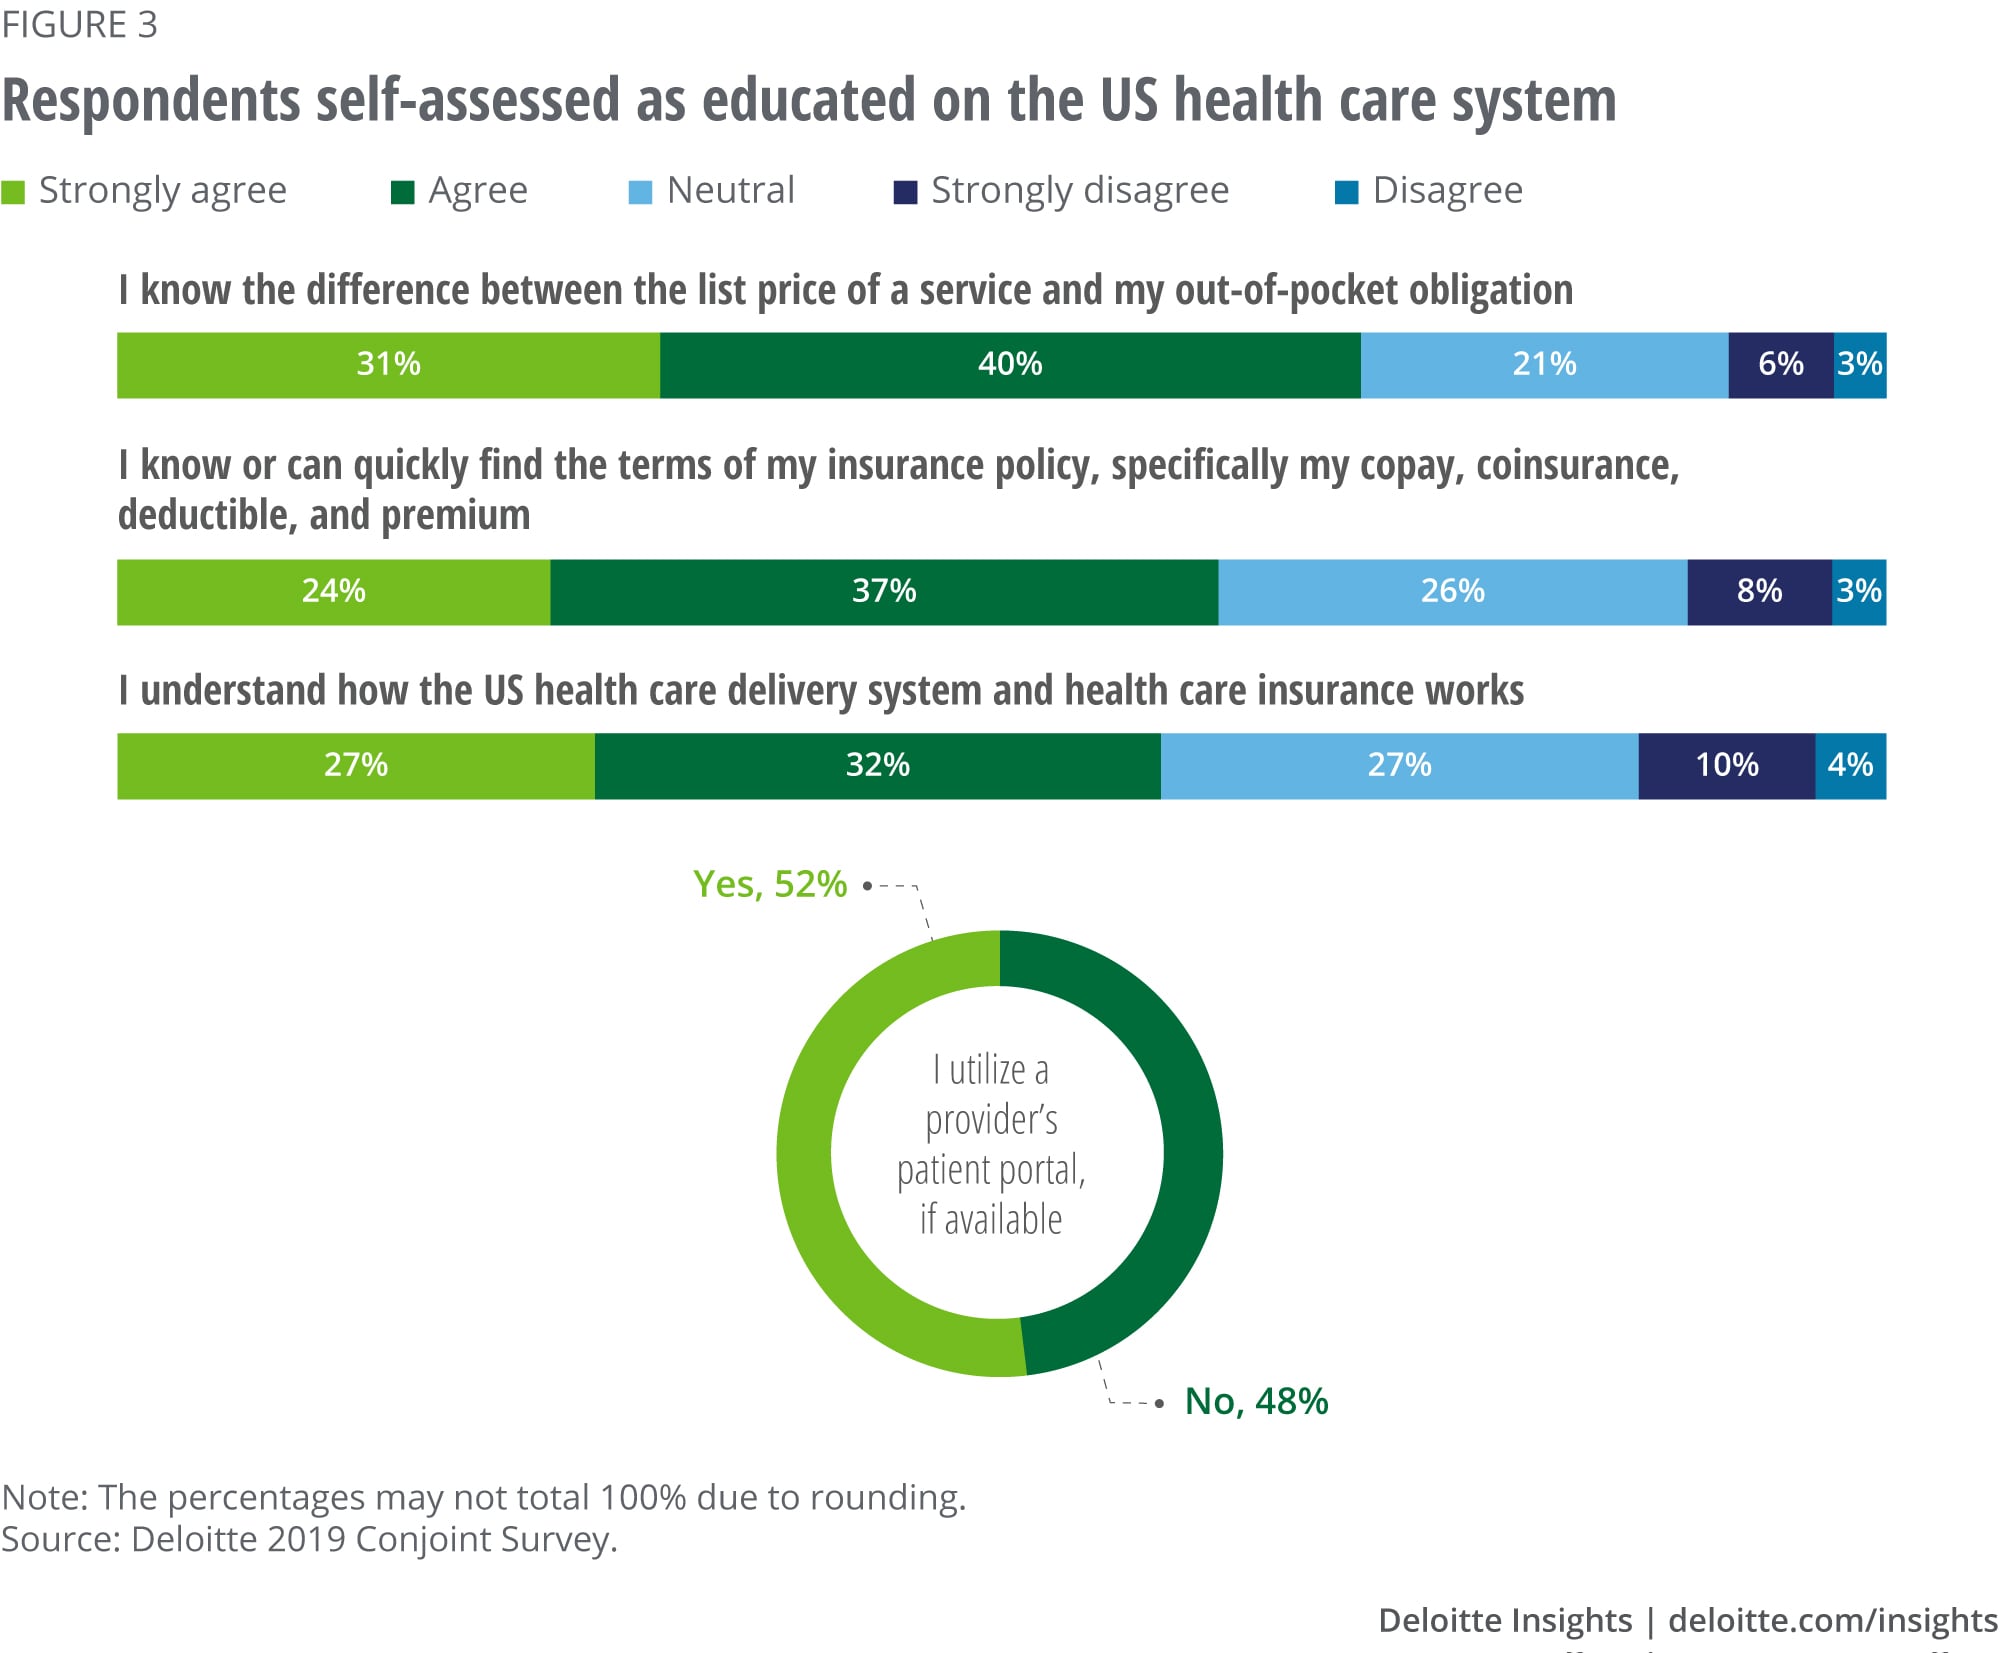 Respondents self-assessed as educated on the US health care system